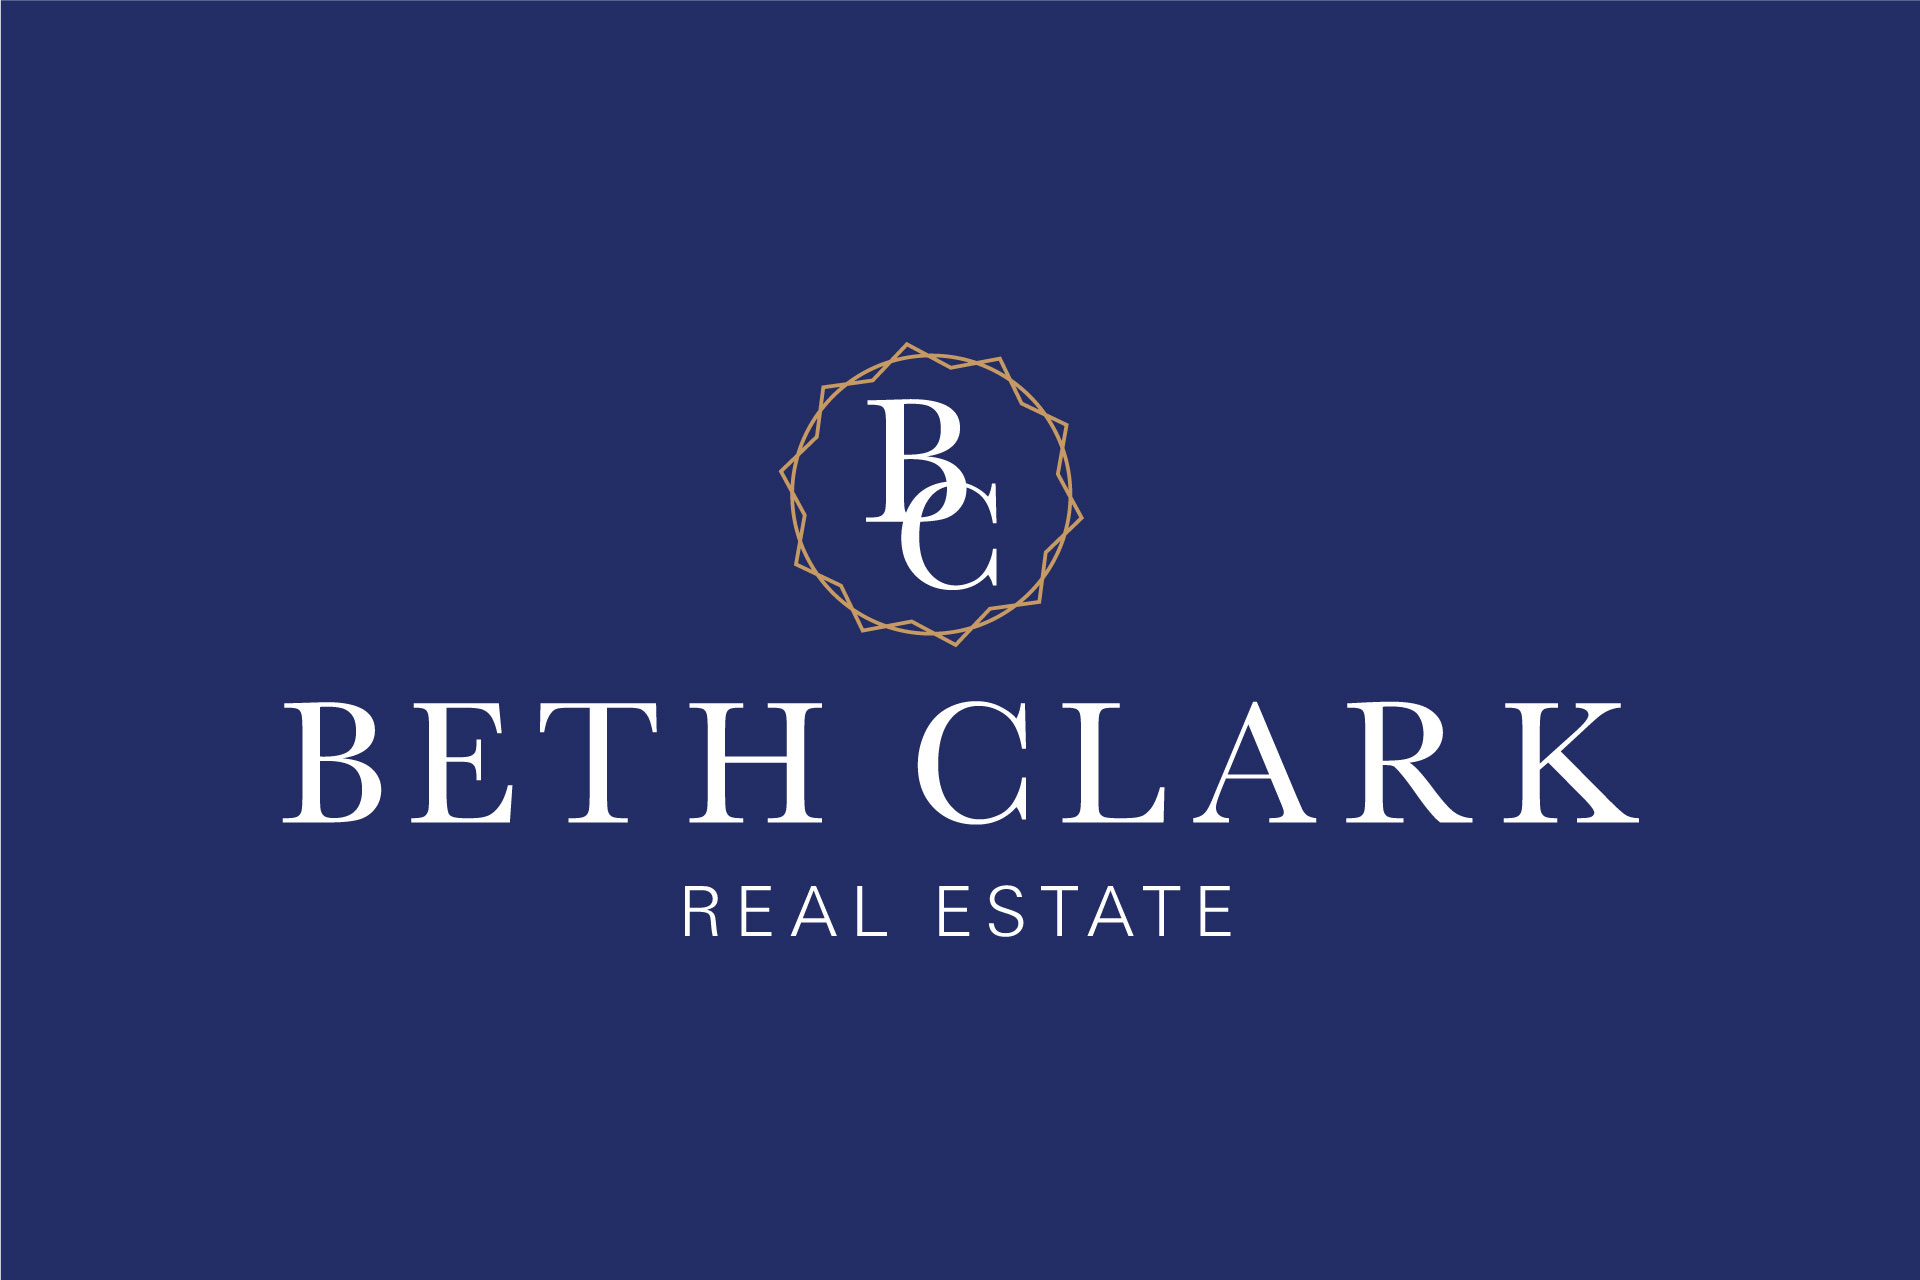 Logo and branding design for a real estate company